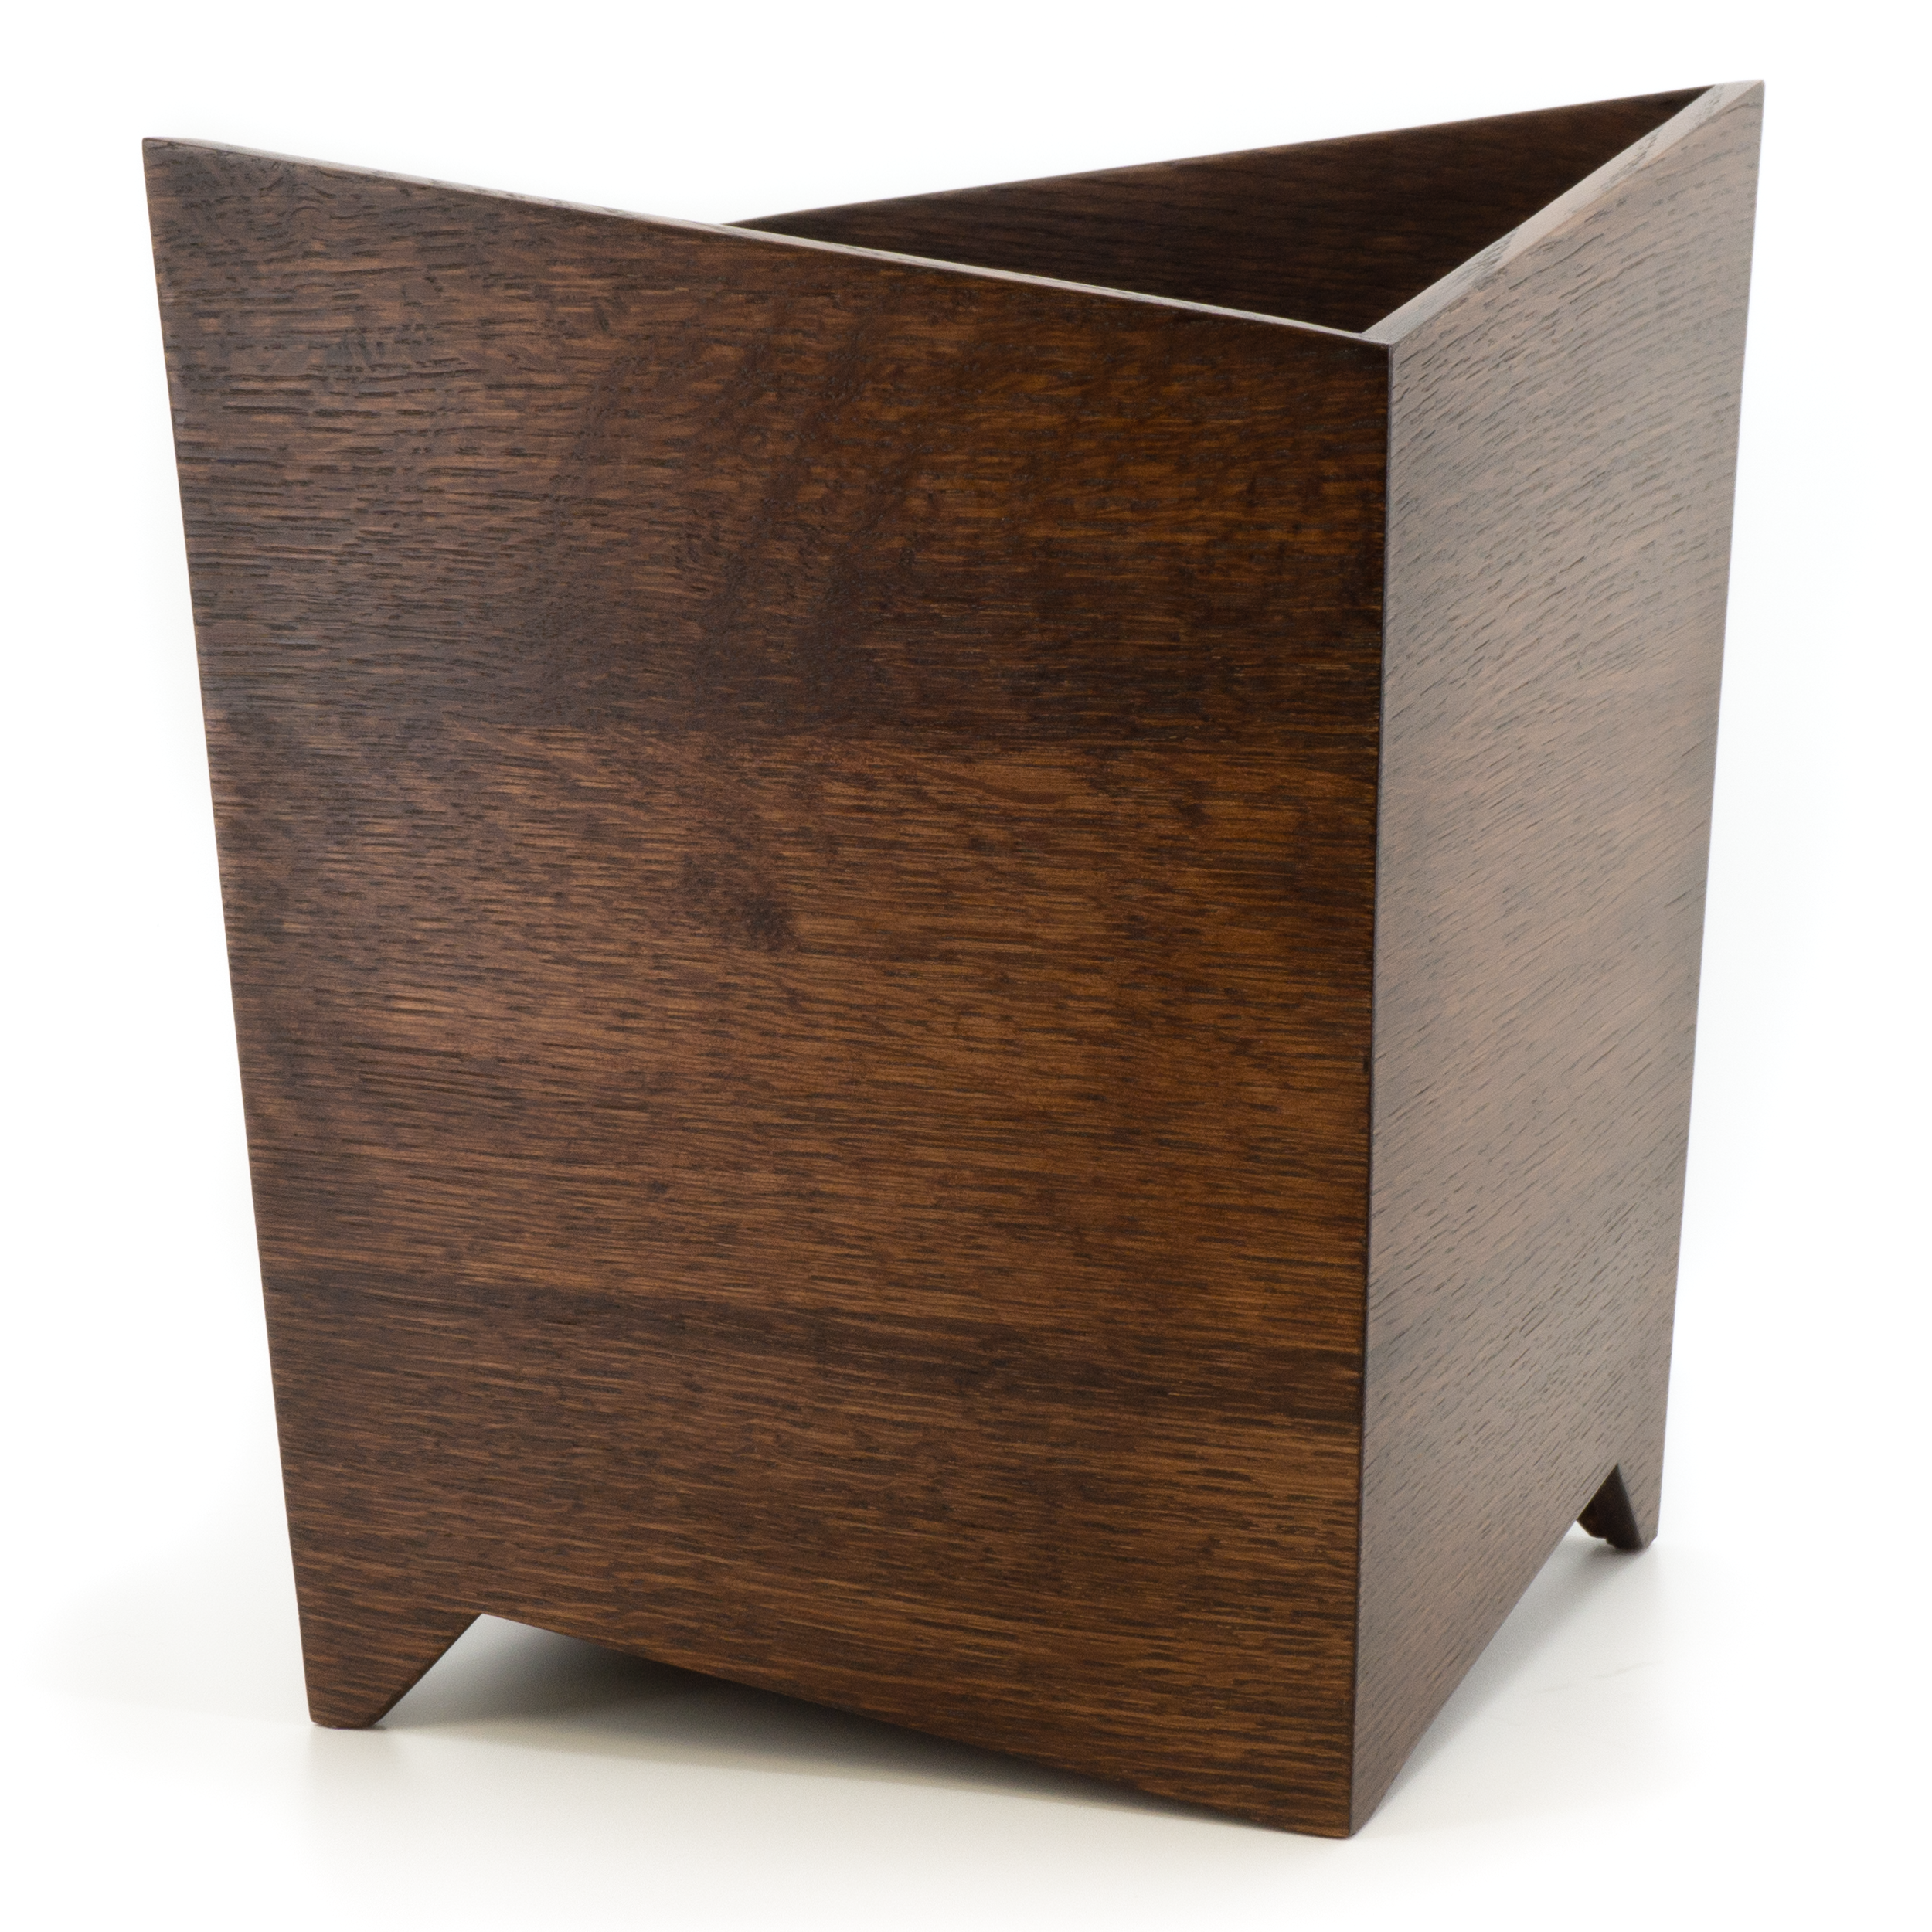 Twisted Wastebasket, Lacquer